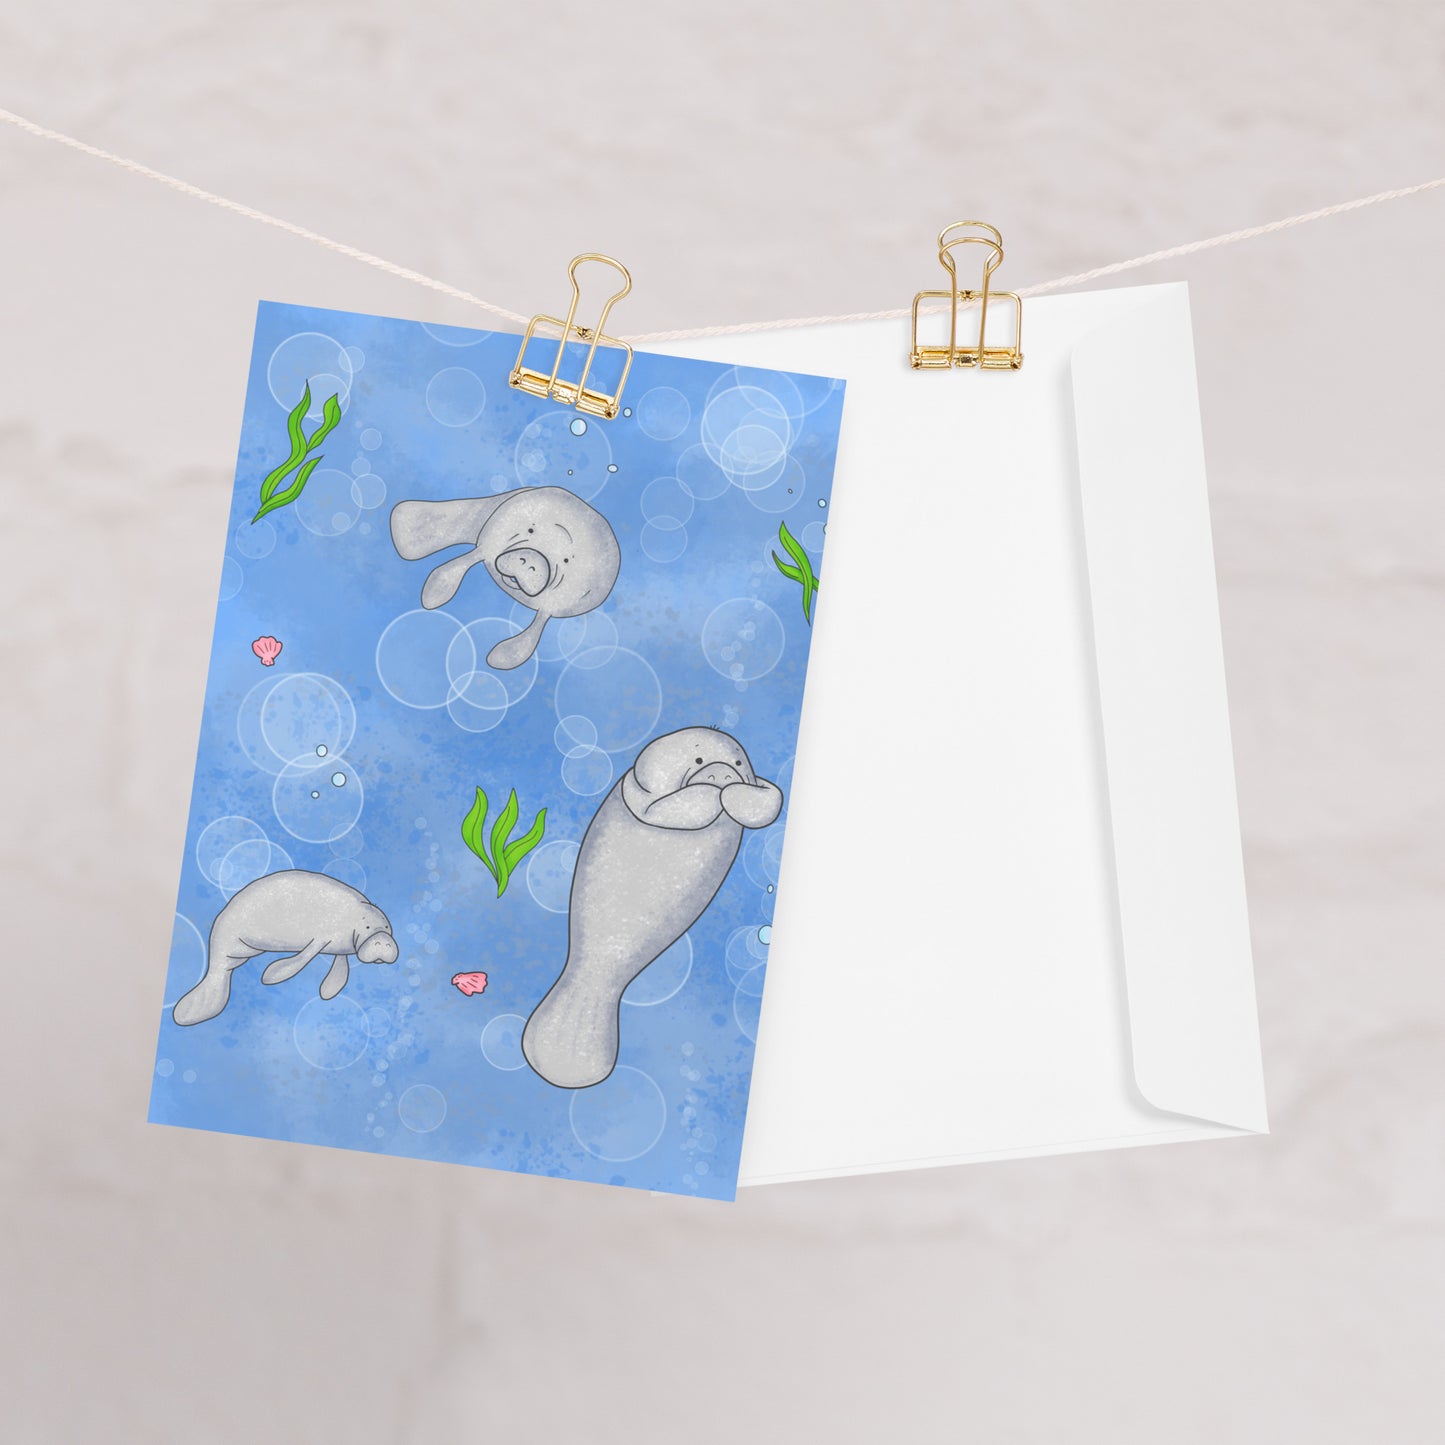 Pack of ten 5 x 7 inch greeting cards. Features illustrated roly-poly manatees on the front. Inside is blank. Made of coated paperboard. Comes with ten envelopes. One card shown on clothesline with white envelope.